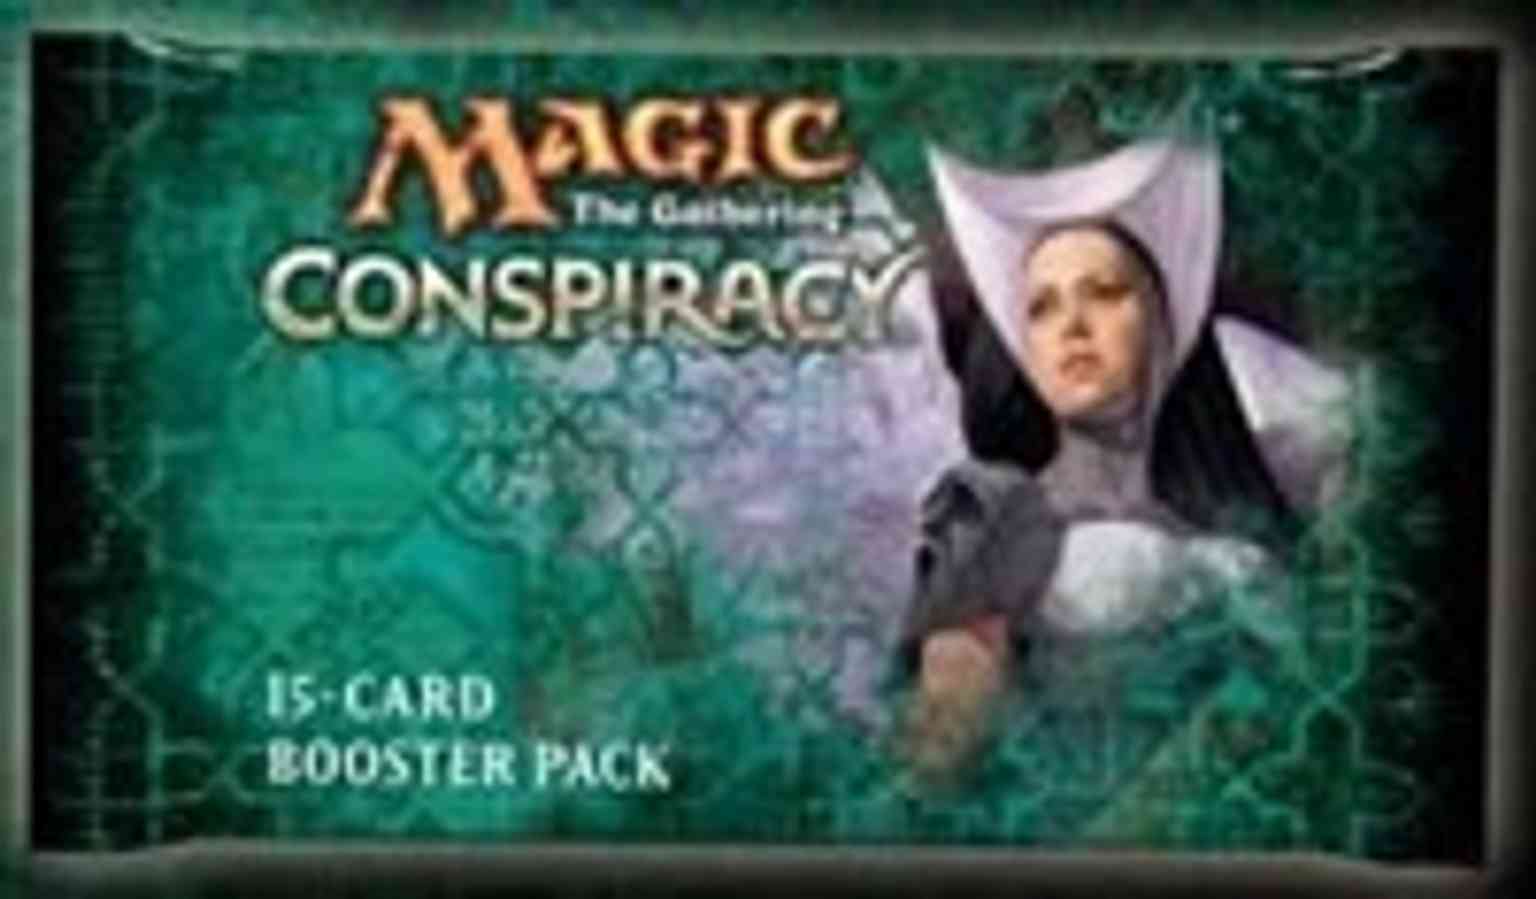 Conspiracy - Booster Pack magic card front